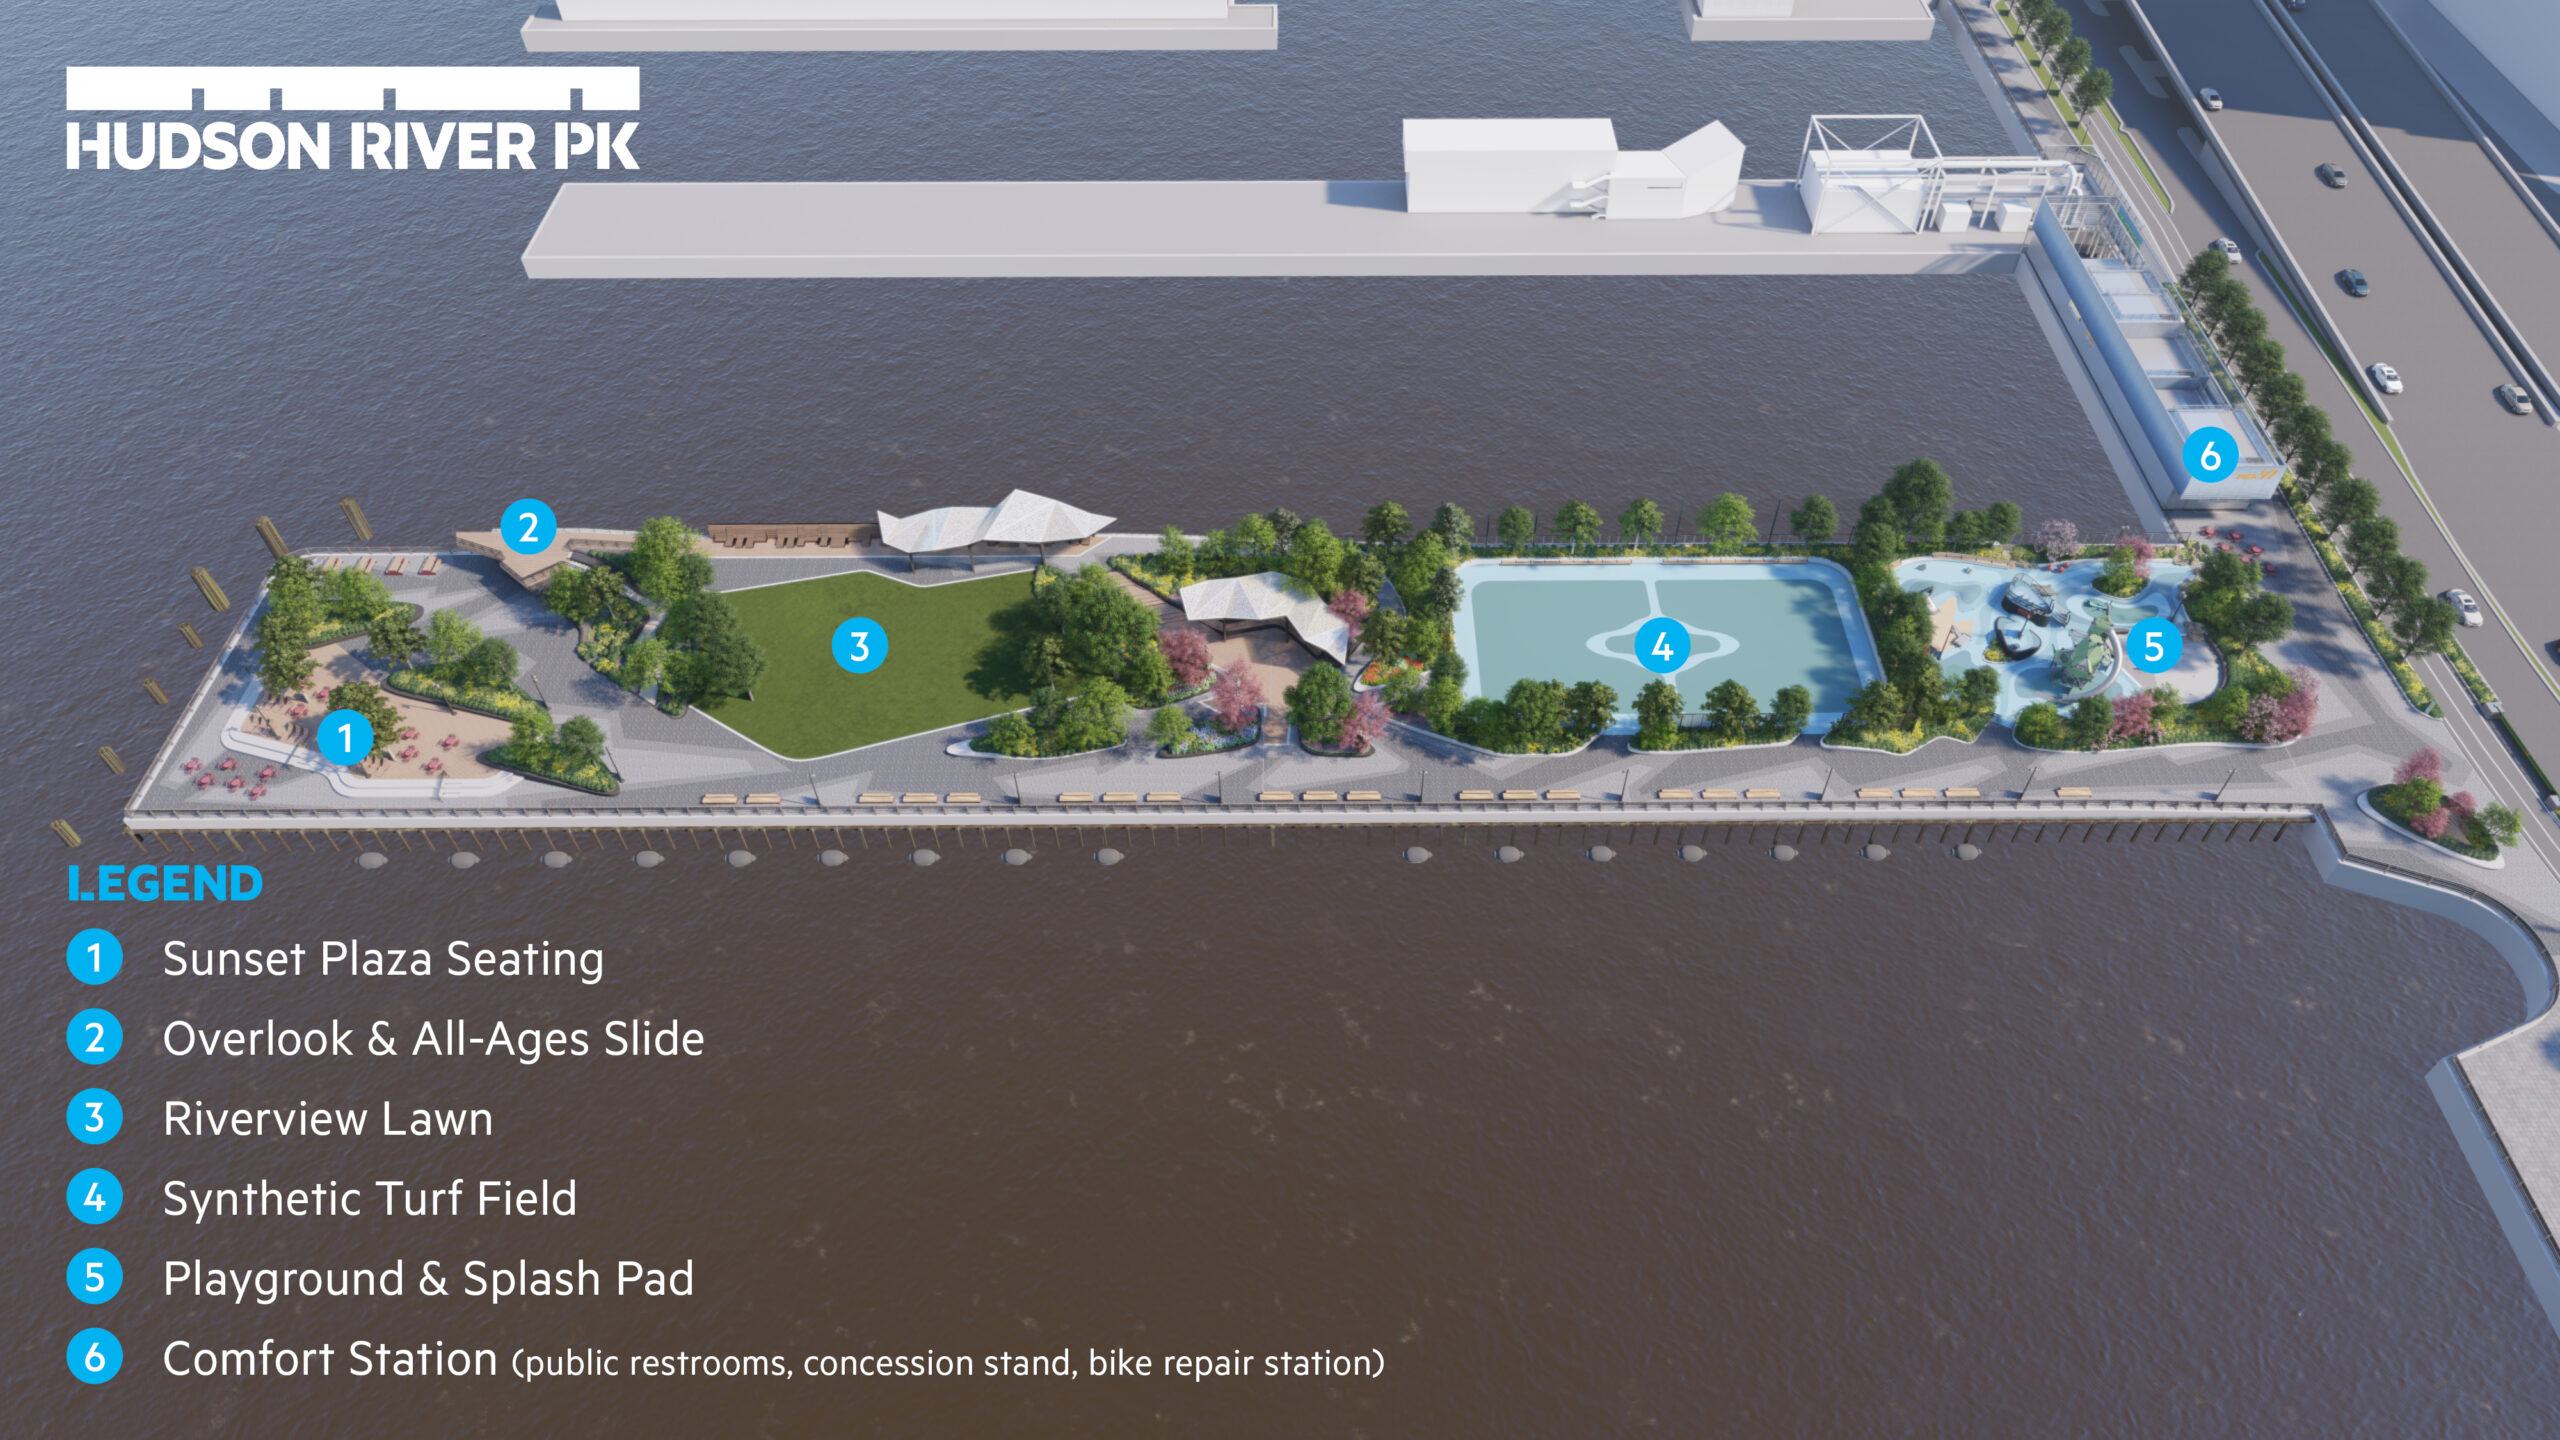 A rendering of Hudson River Park's Pier 97 with a list of planned amenities, including: Sunset Plaza Seating; Overlook and All-Ages Slide; Riverview Lawn; Synthetic Turf Field; Playground and Splash Pad; and Comfort Station with public restrooms, a concession stand and a bike repair station